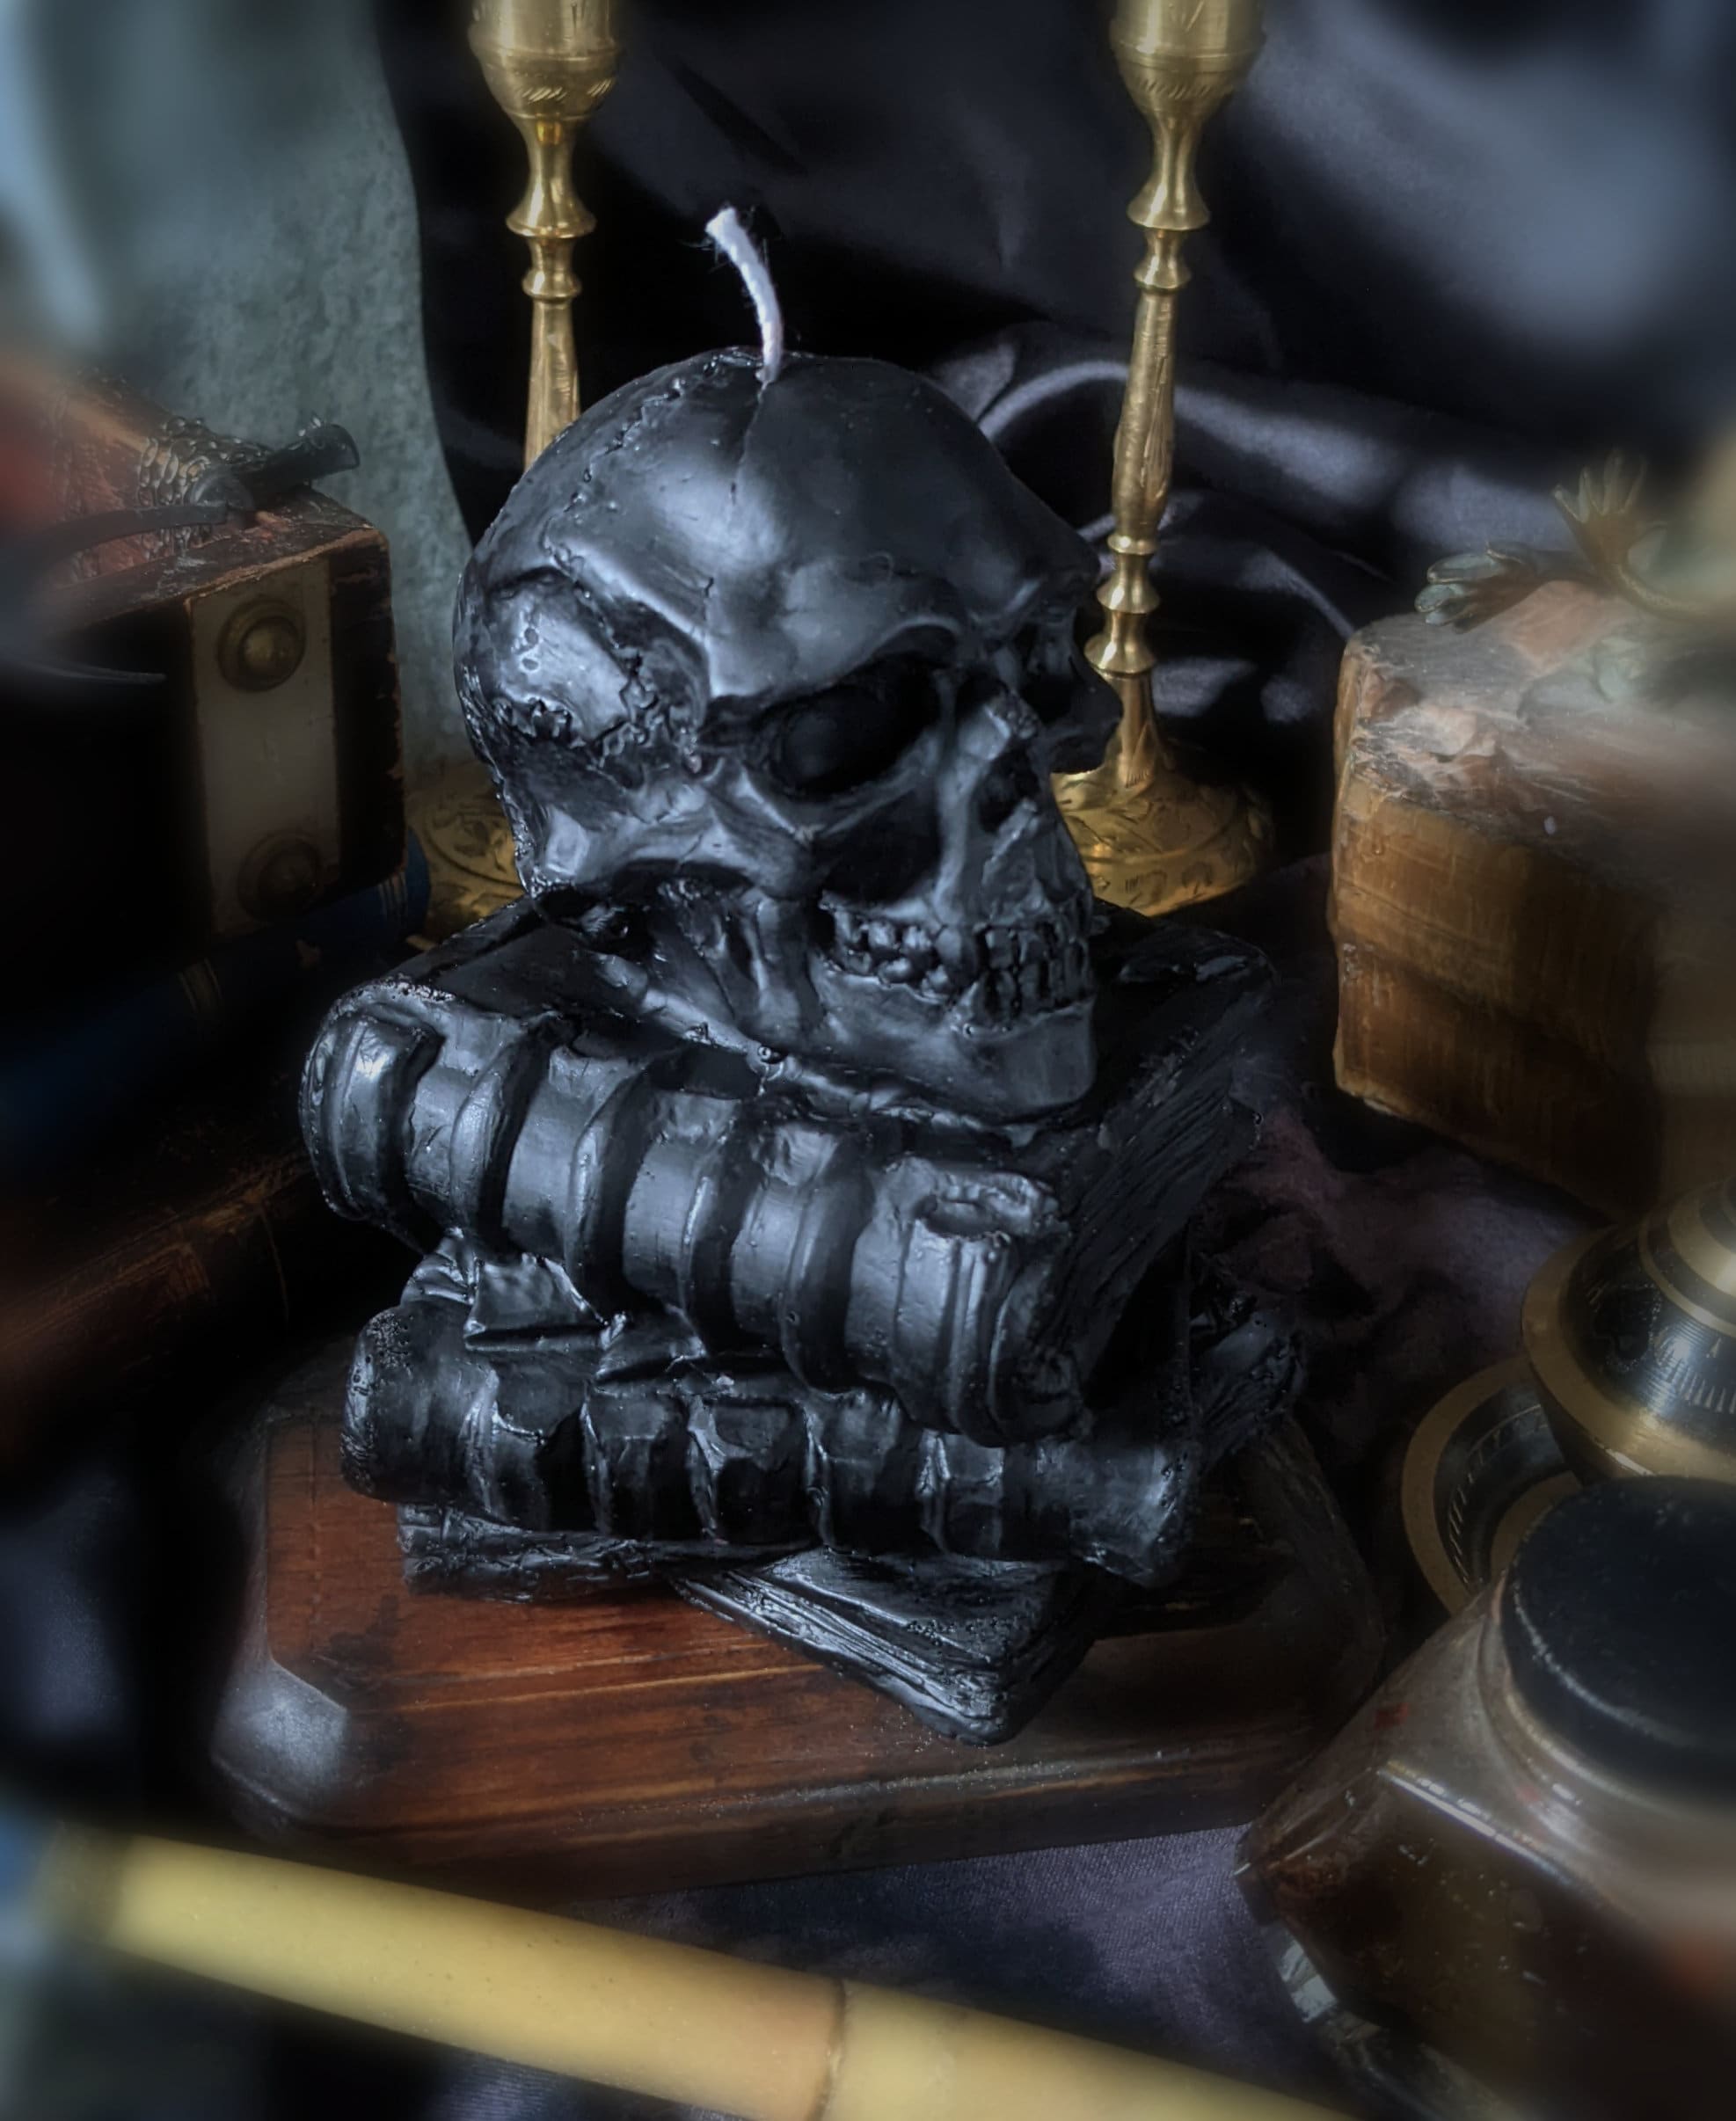 The Skull of Spirits Candle – Repose Comforts